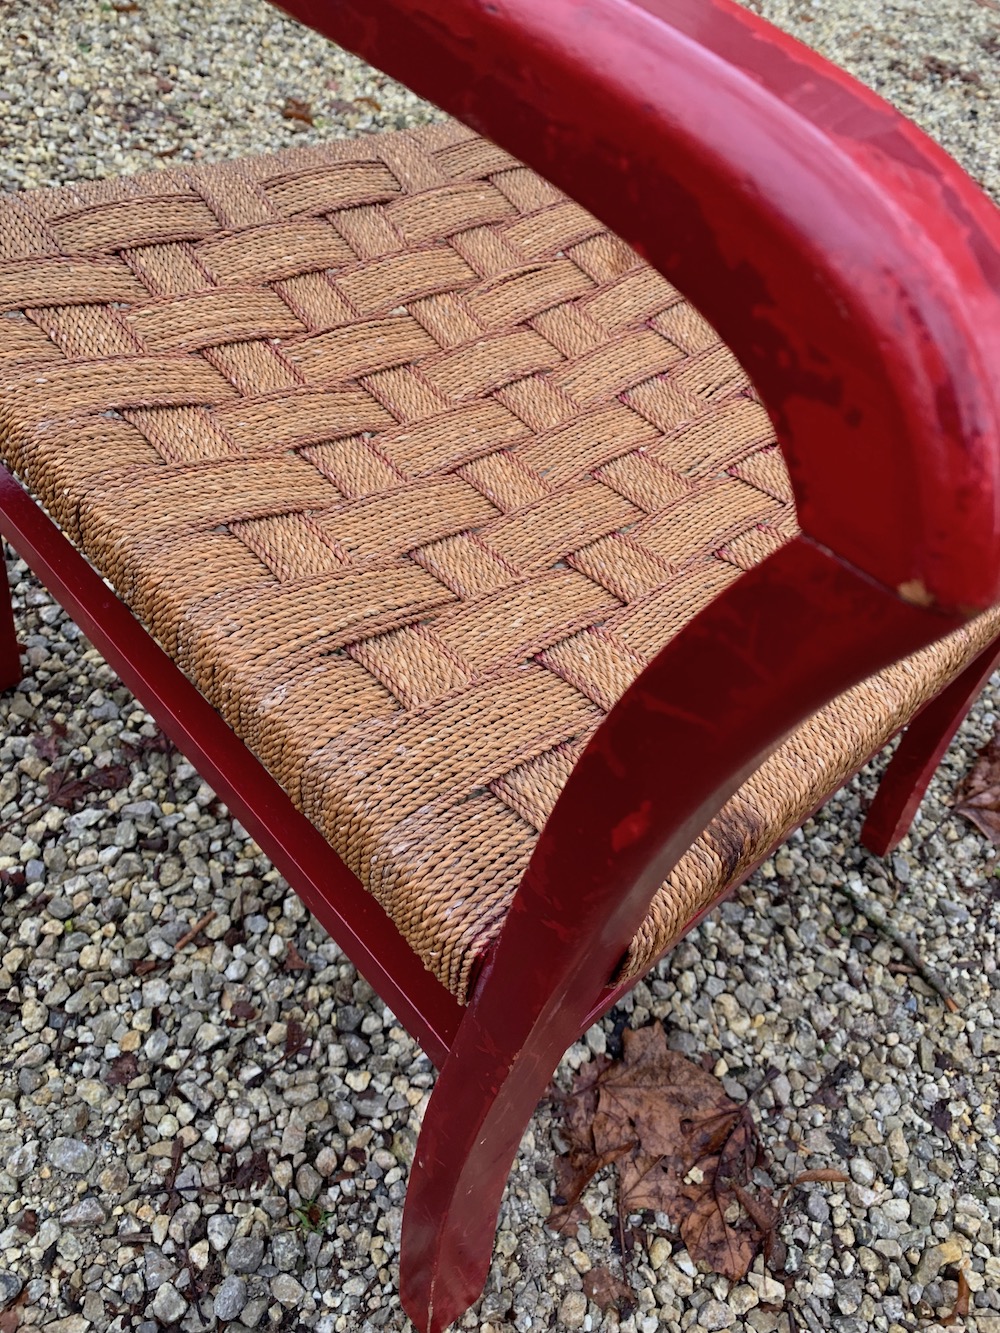 kinfolk, interior decoration, vintage furniture, easy chair, easy chairs, wooden chair, handmade chairs, rope chairs, vintage chairs, armrests, chairs with armrests, lounge chair, vintage lounge chairs, red chairs, reading chairs, modernism, modern chairs